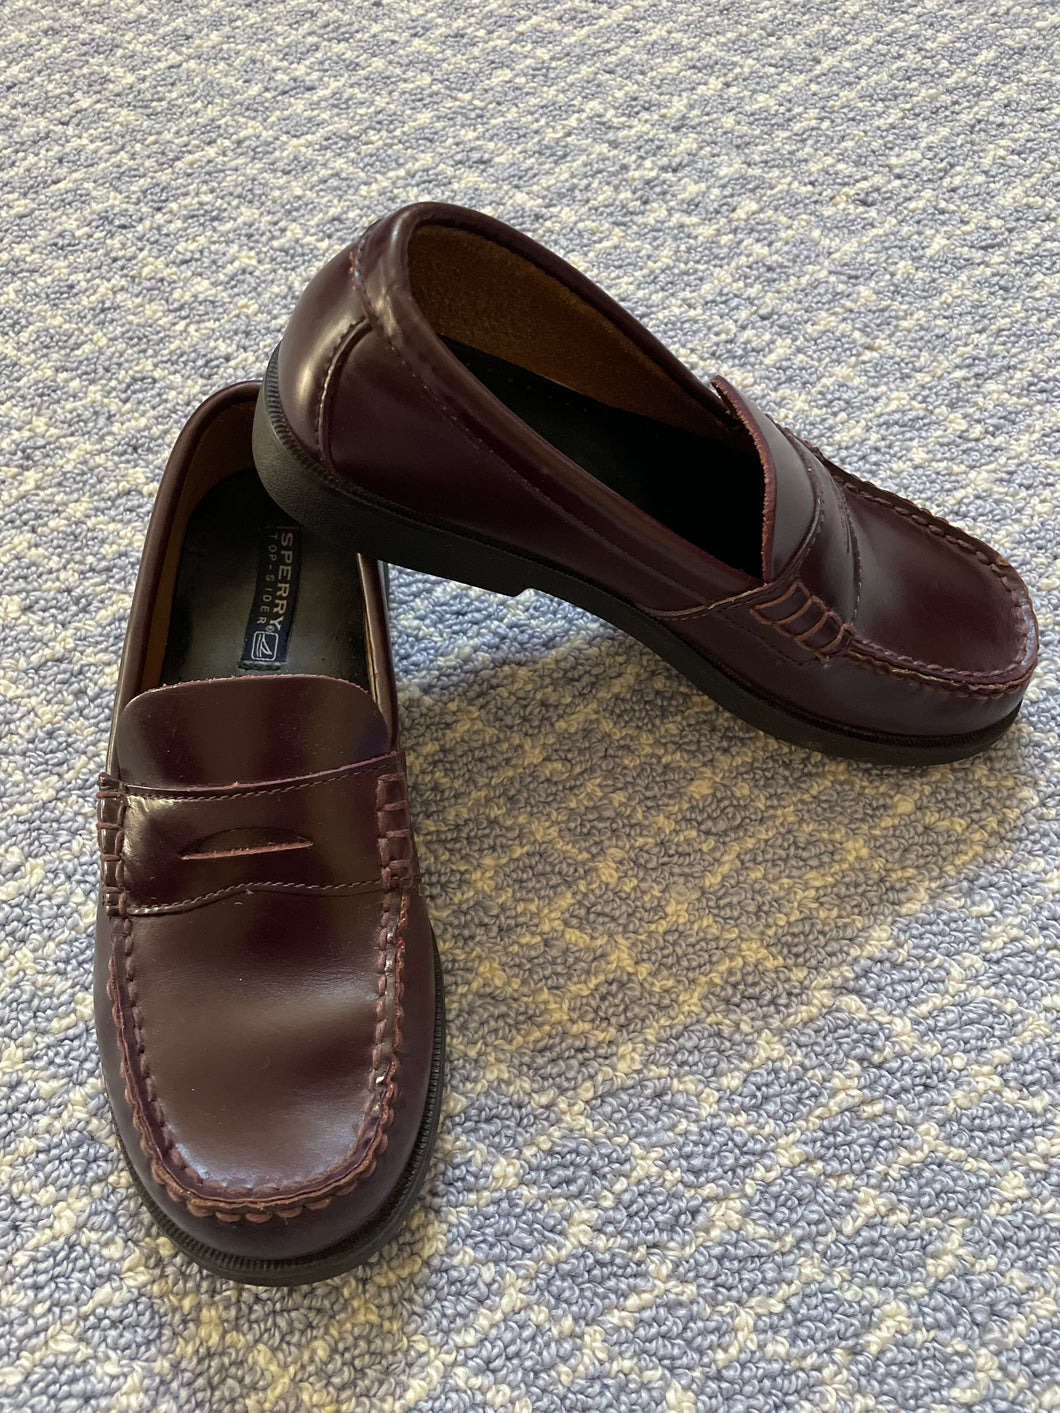 NEW Sperry Top-Sider Brown Leather Penny Loafers 2.5